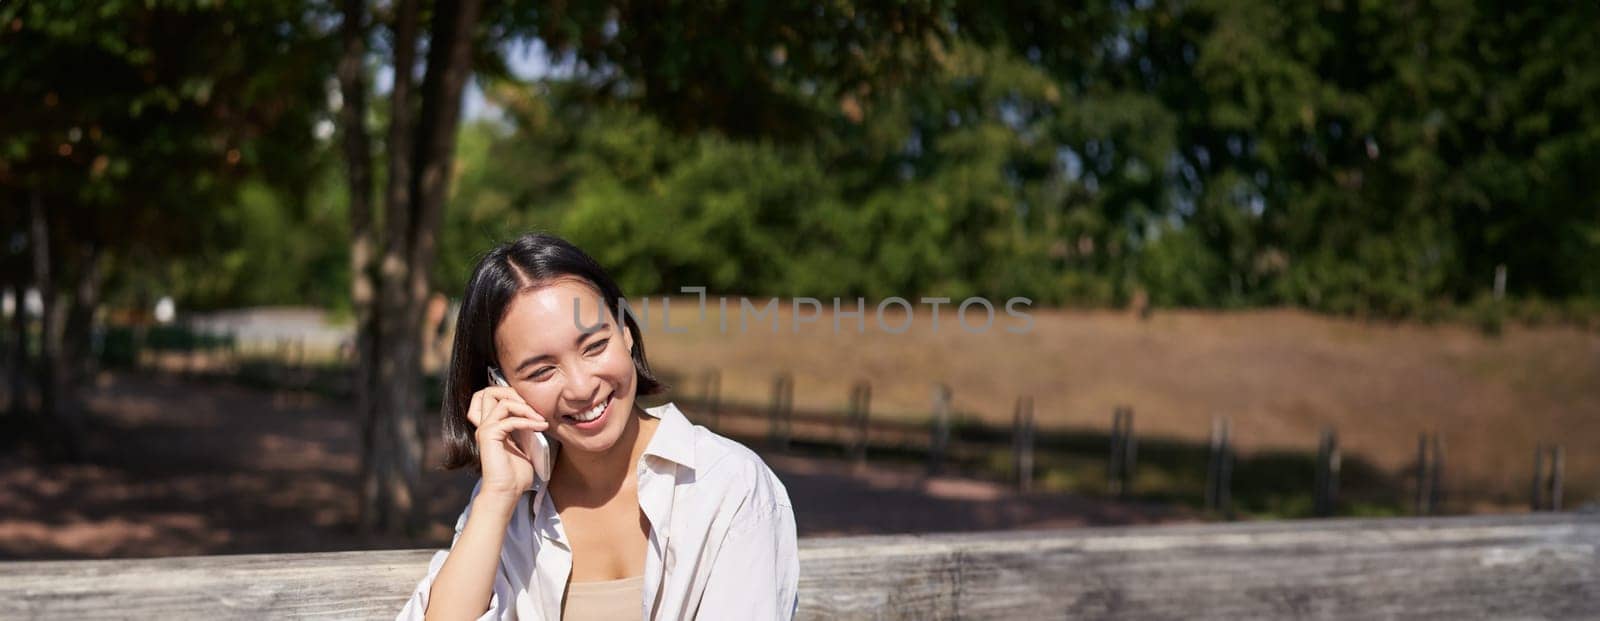 Smiling asian girl relaxing in park, talking on smartphone, having a mobile call while resting outdoors.